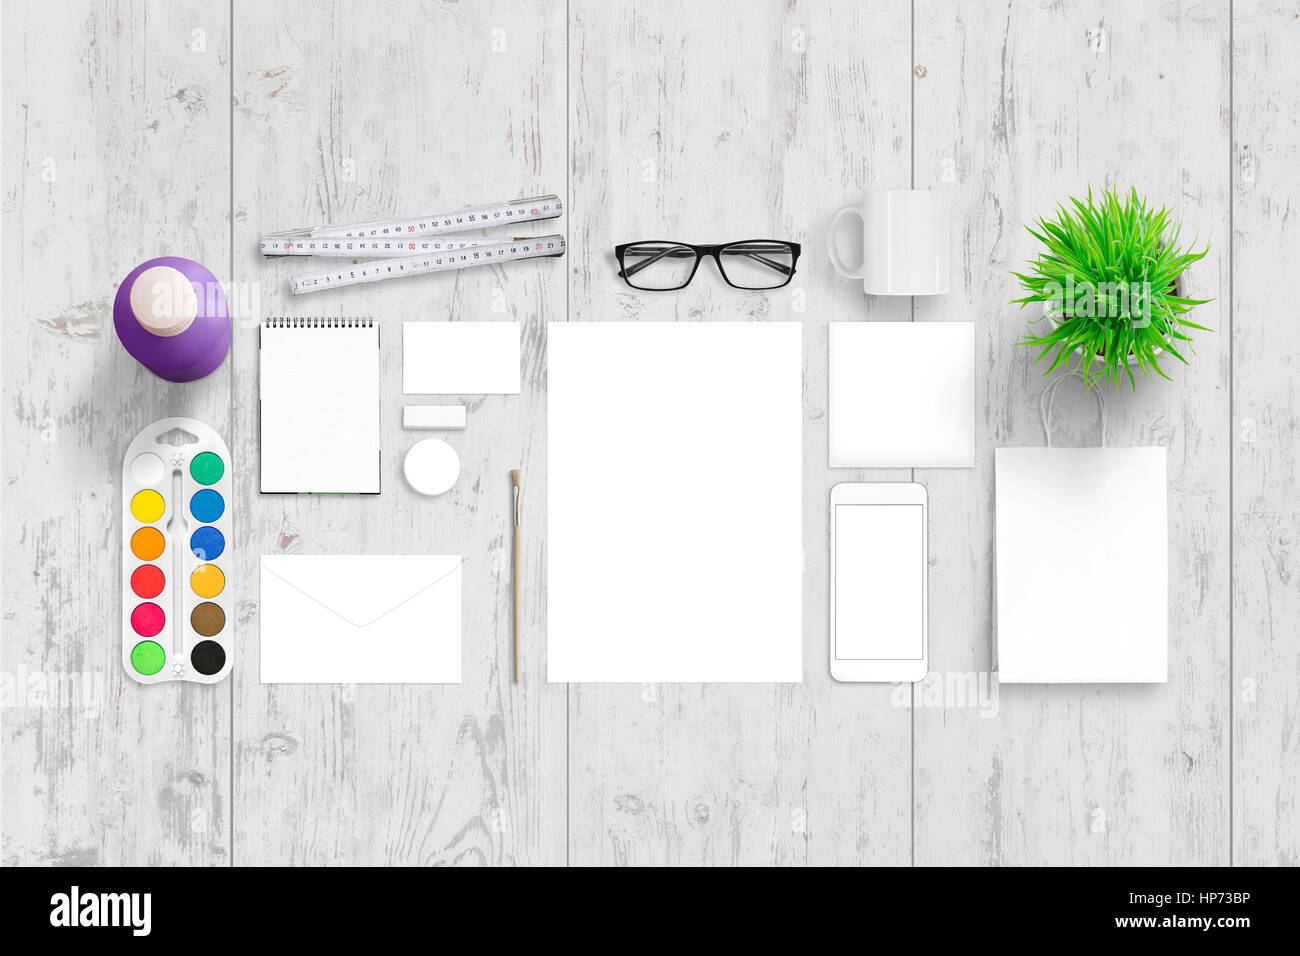 Office stationery for corporate branding. Top view of white wooden desk with paper, pad, bag, envelope, business card, badge, mug, plant, glasses, wat Stock Photo